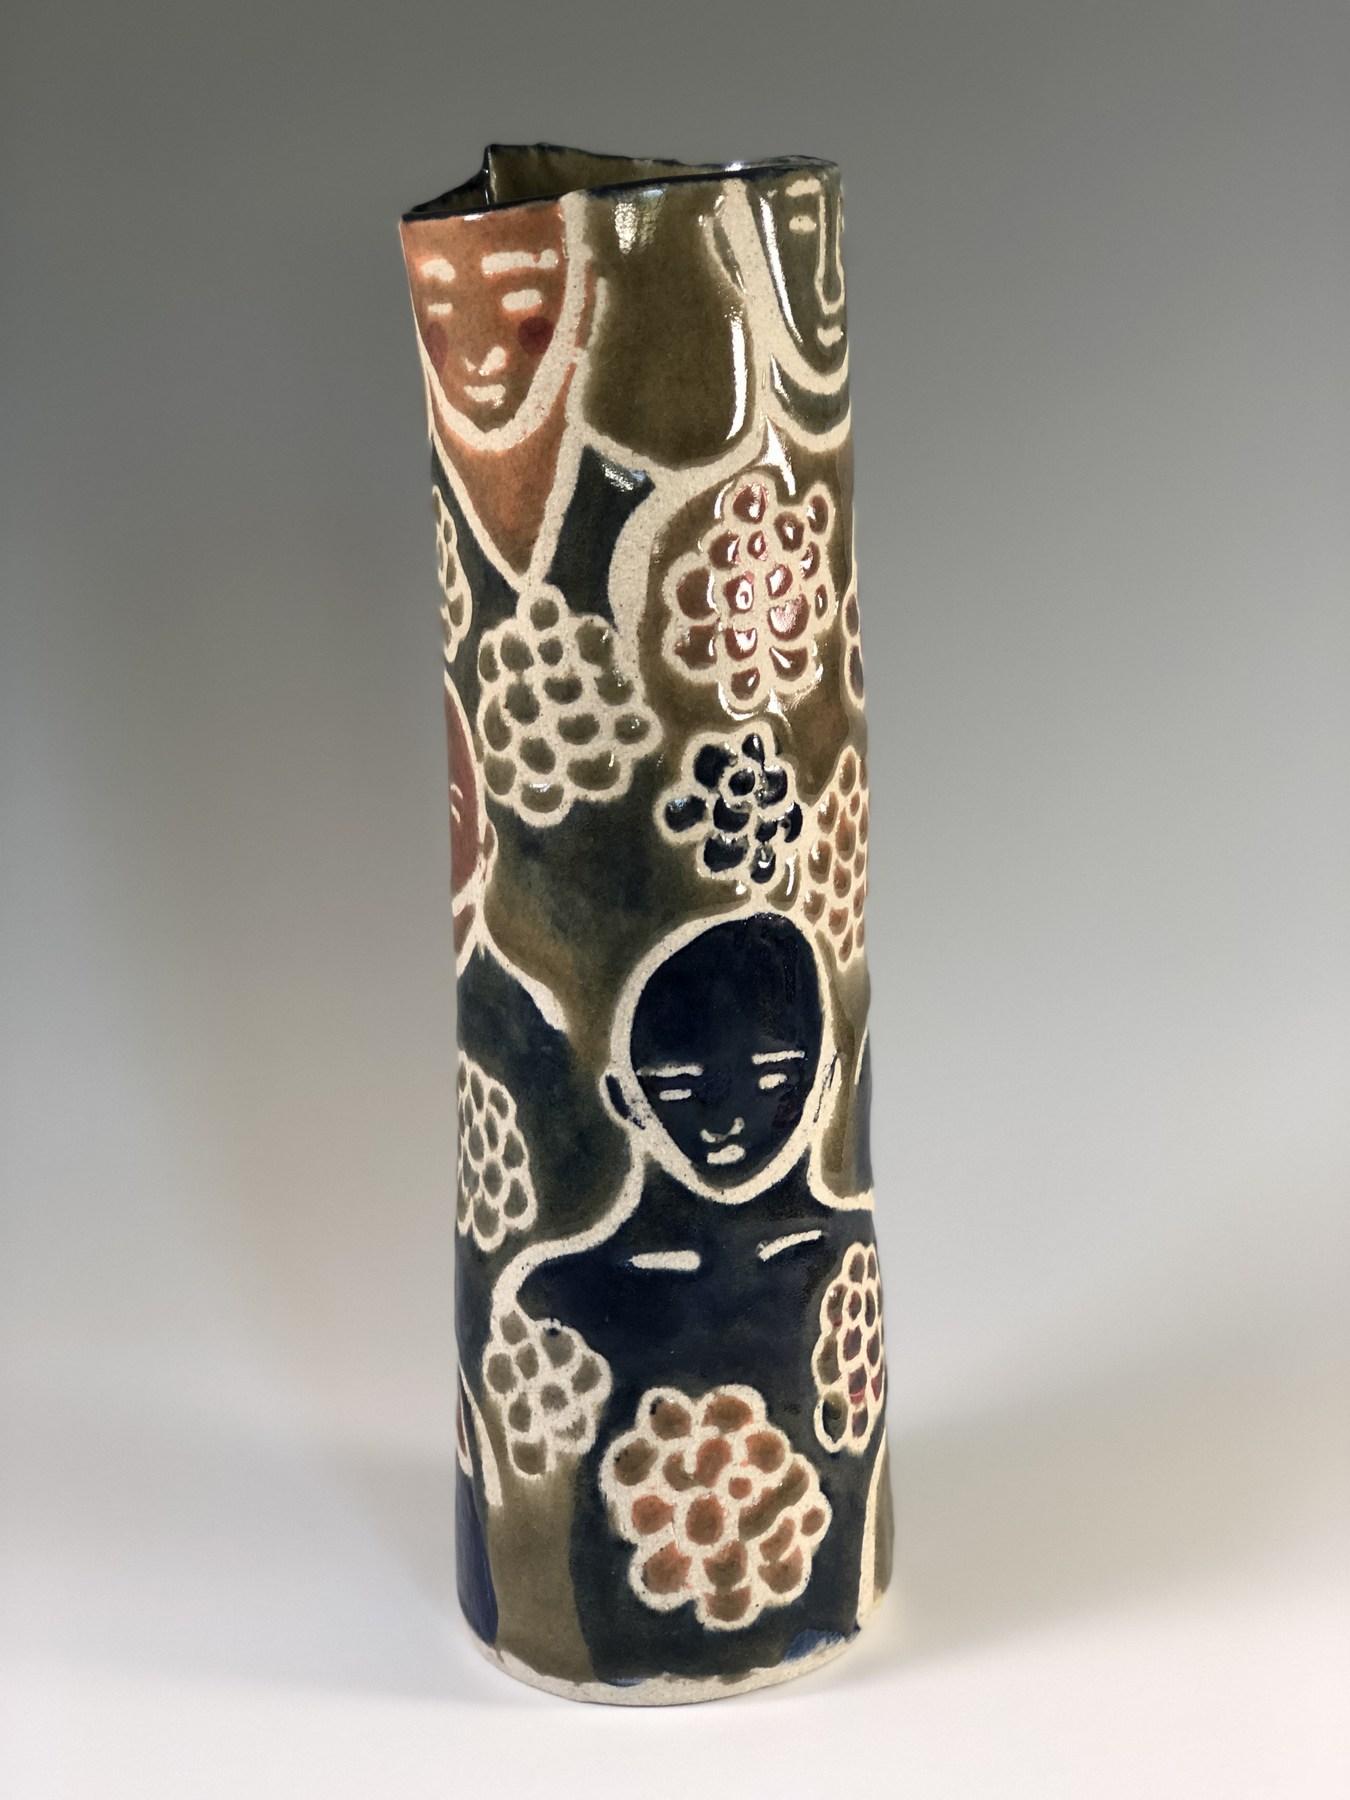 Tall Cylinder with People and Flowers - Gray Figurative Sculpture by Elizabeth Currer